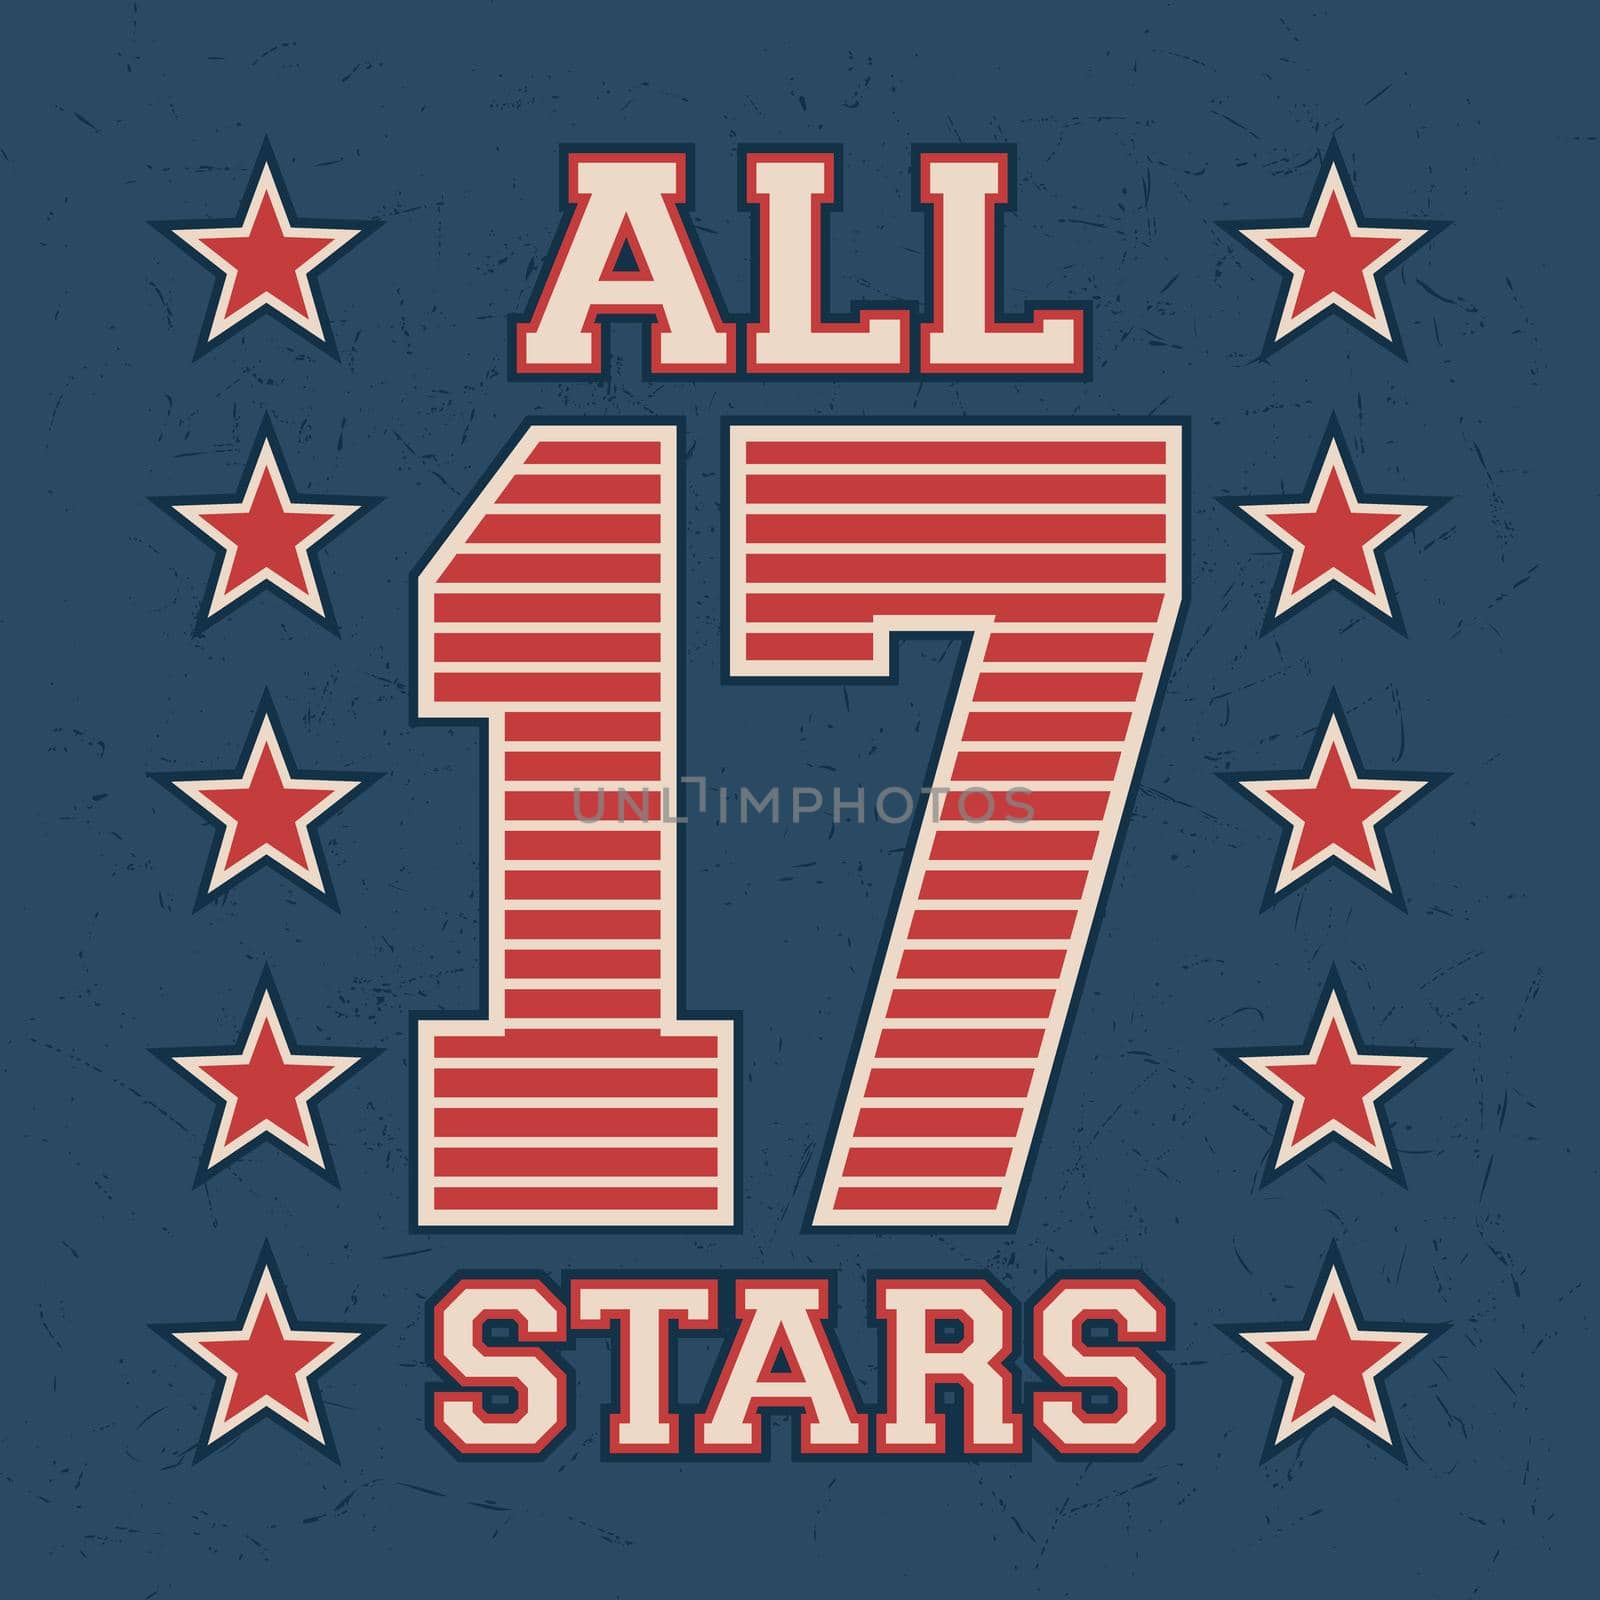 T-shirt print design. All stars vintage stamp. Printing and badge, applique, label for t-shirts, jeans, casual wear. Vector illustration.